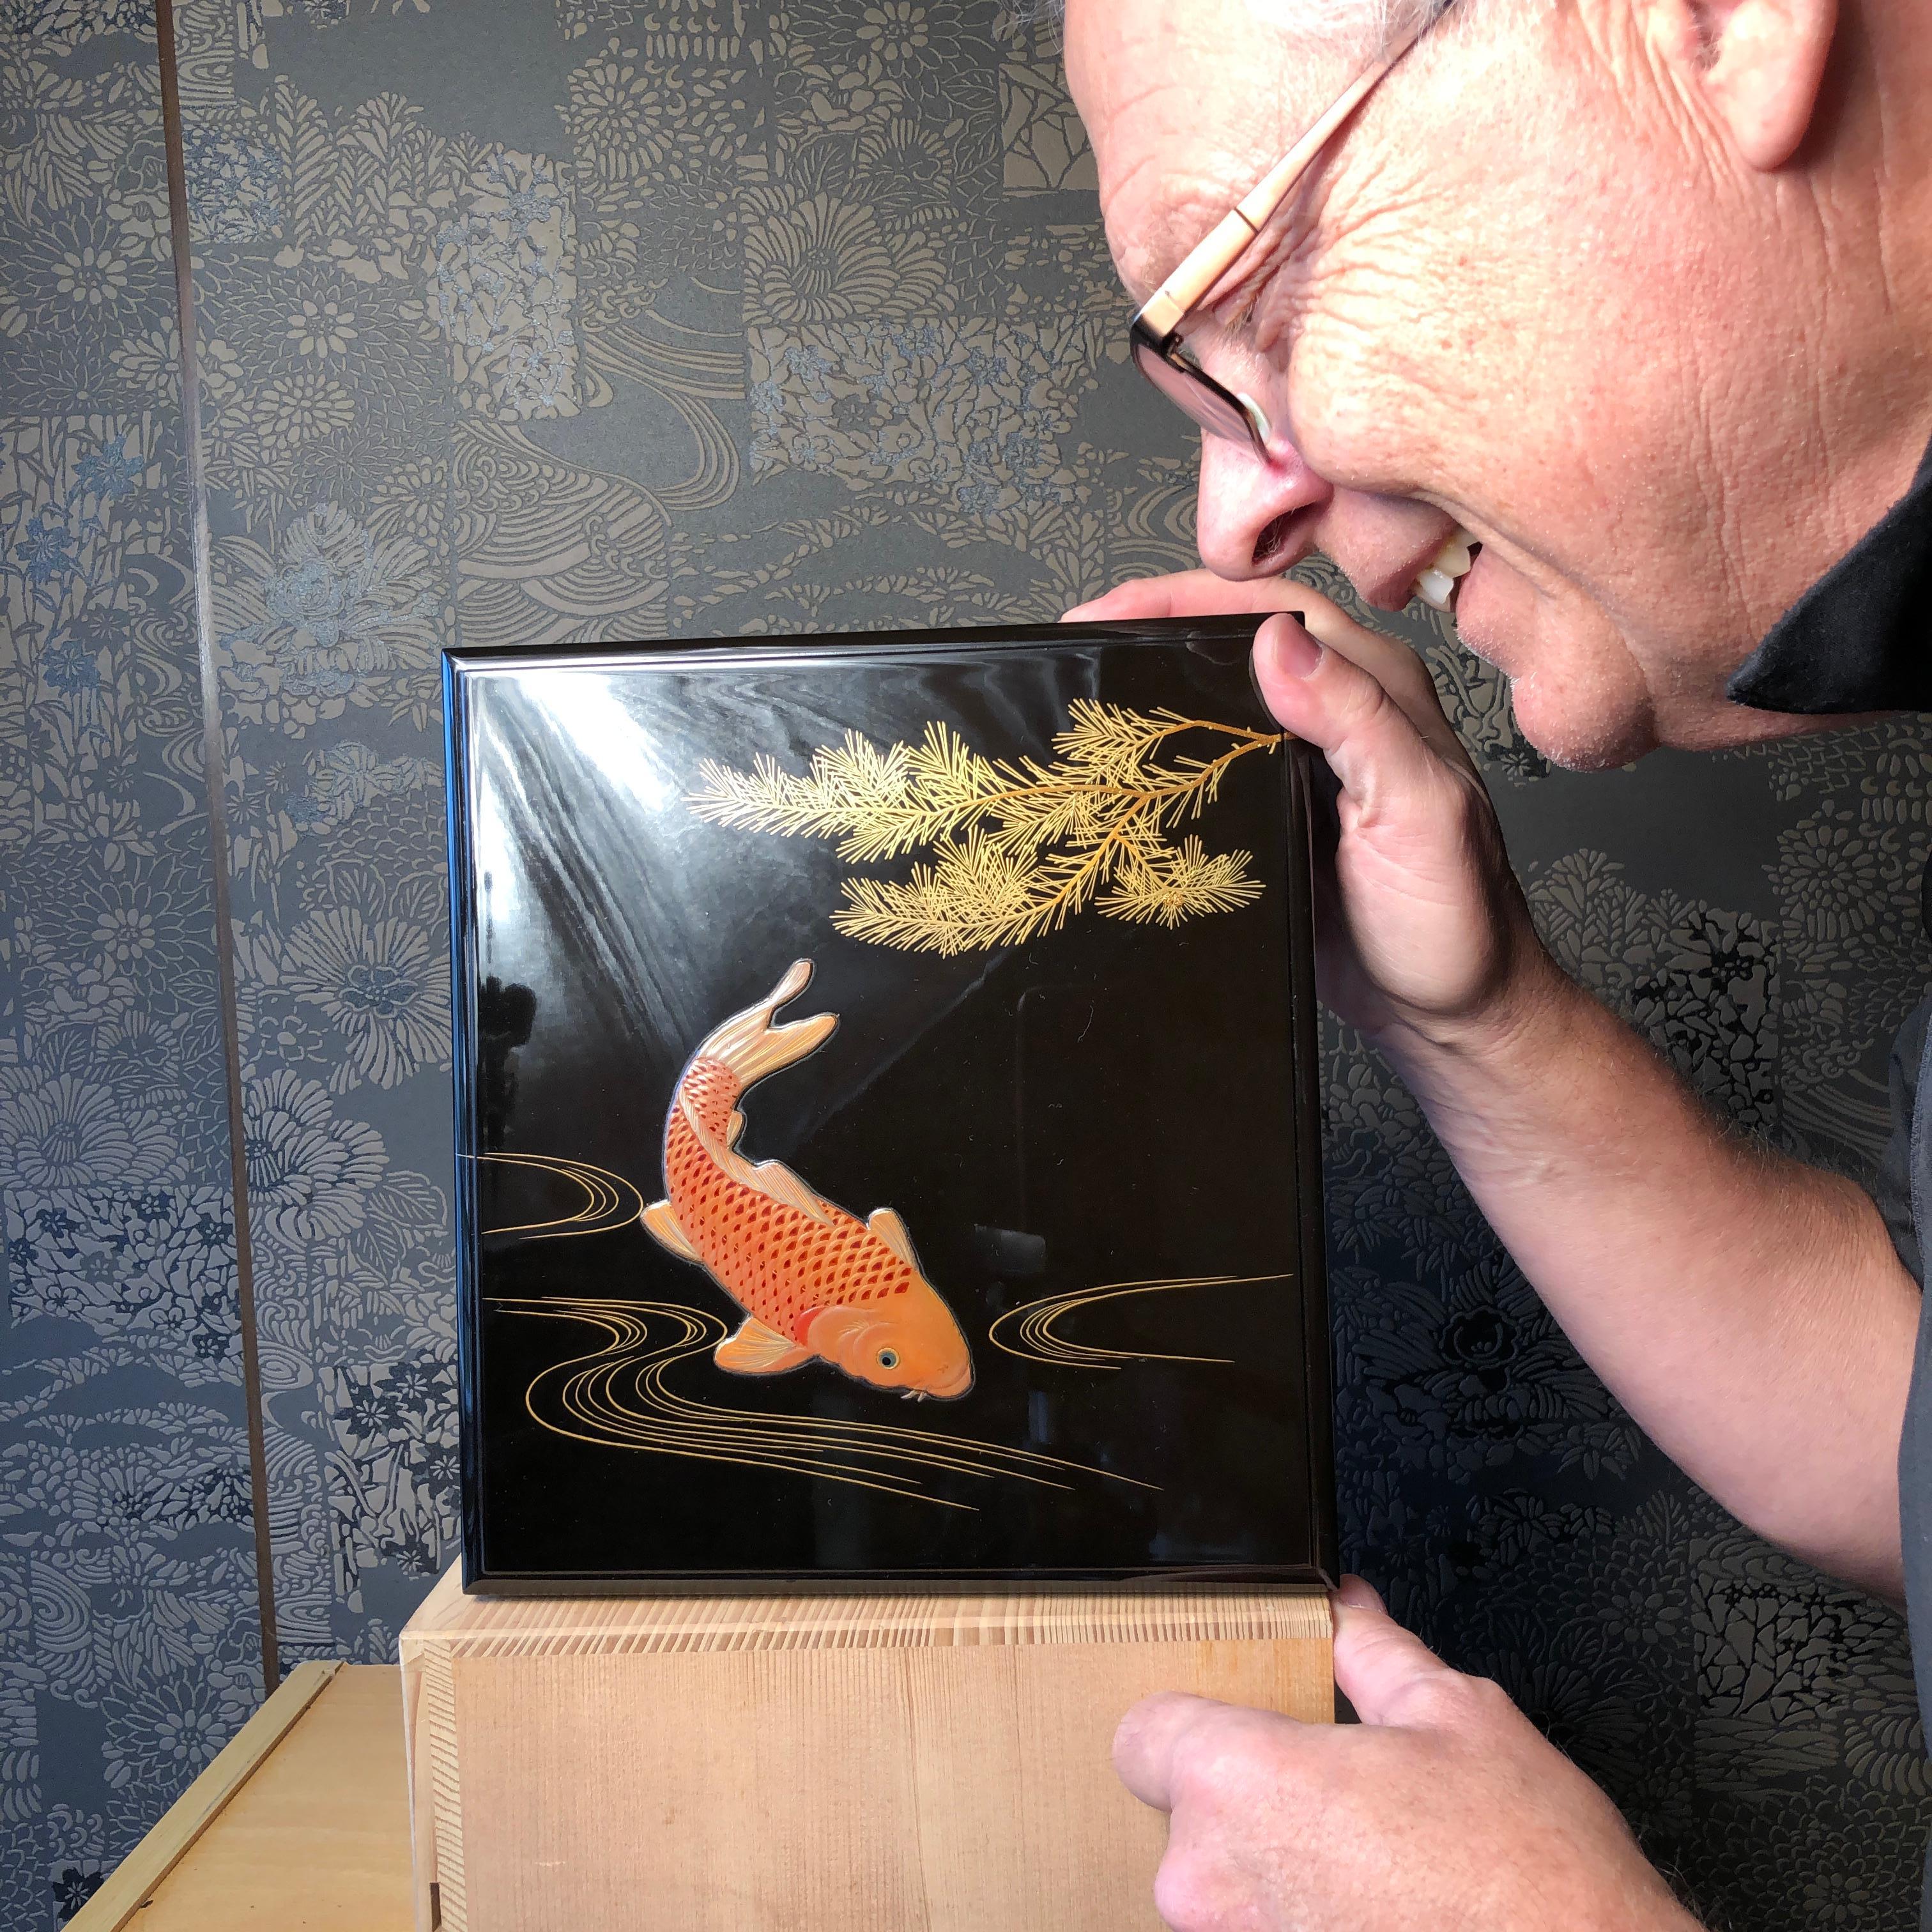 From our recent Japanese Acquisitions Kyoto travels.

A superb Makie Lacquer Suzuri-Bako writing box complete with its original ink stone and ink stone container crafted in rich black, gold, and red colors and depicting a graceful Koi or Carp